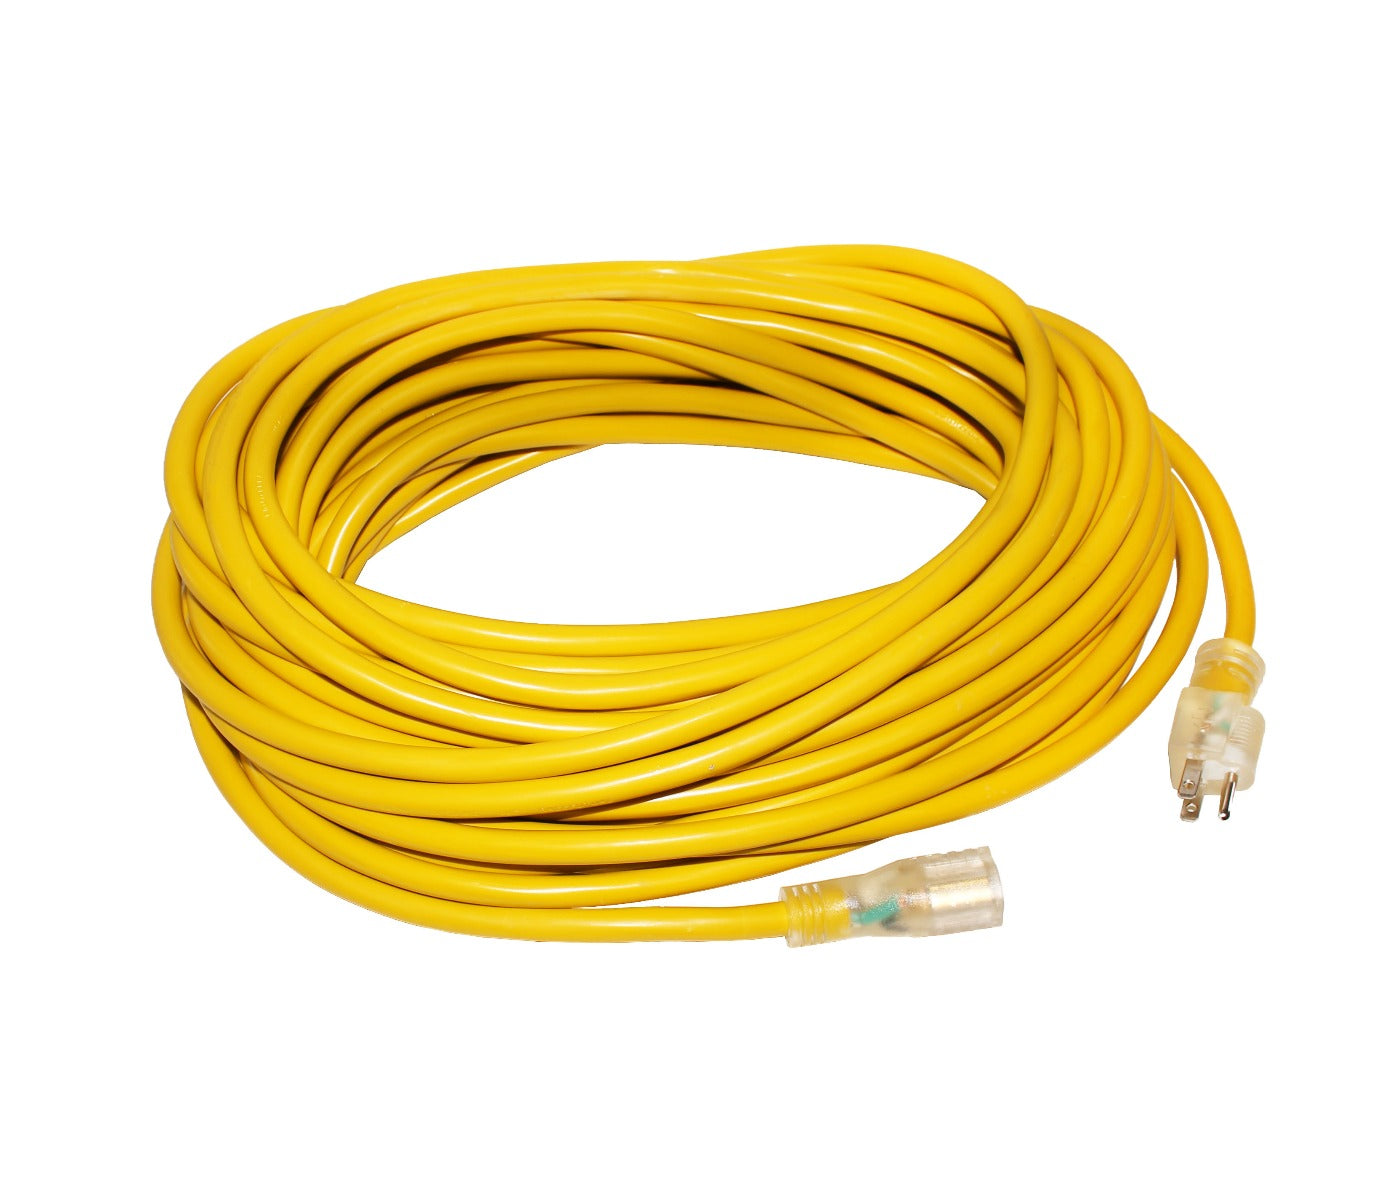 14/3 75ft Lighted Extension Cord 15 Amp,125 Volt,1875 W Outdoor Jacket